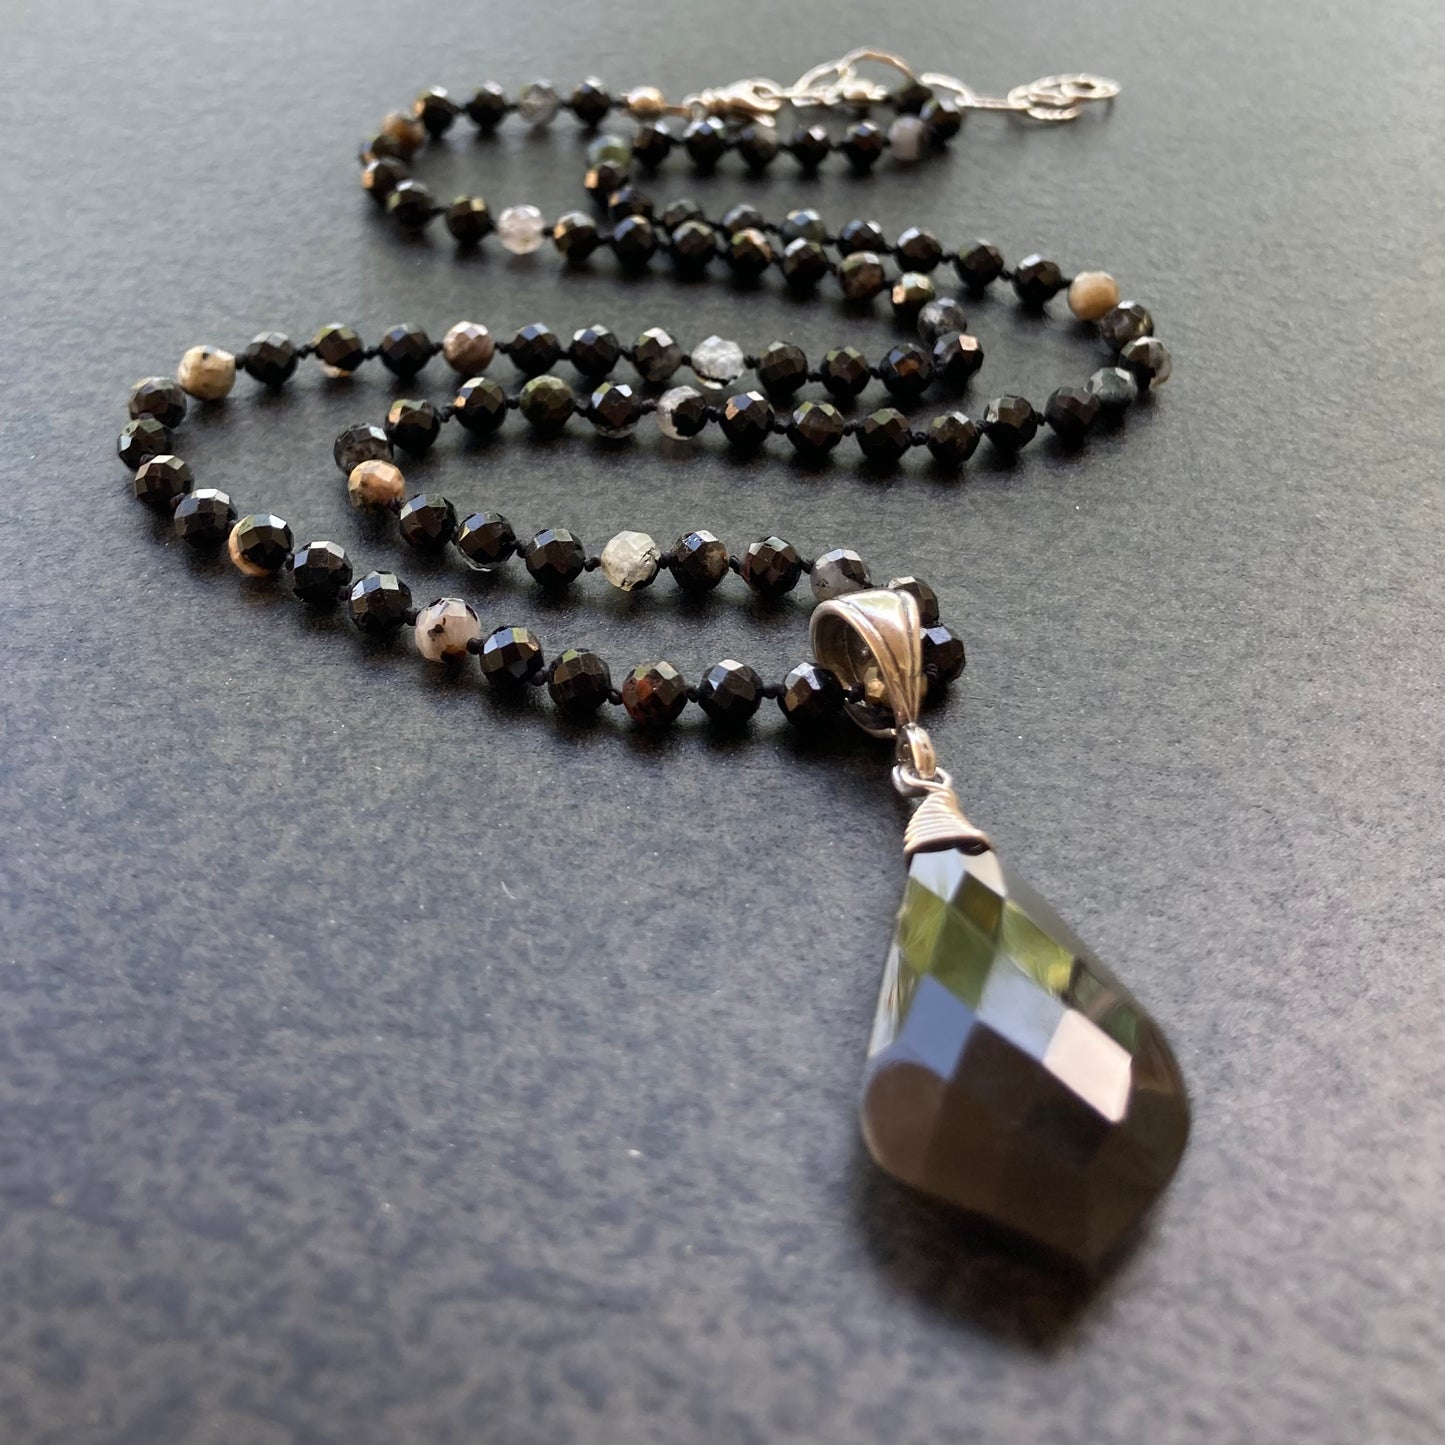 Black Tourmaline Hand Knotted Silk Necklace With Black Onyx Pendant